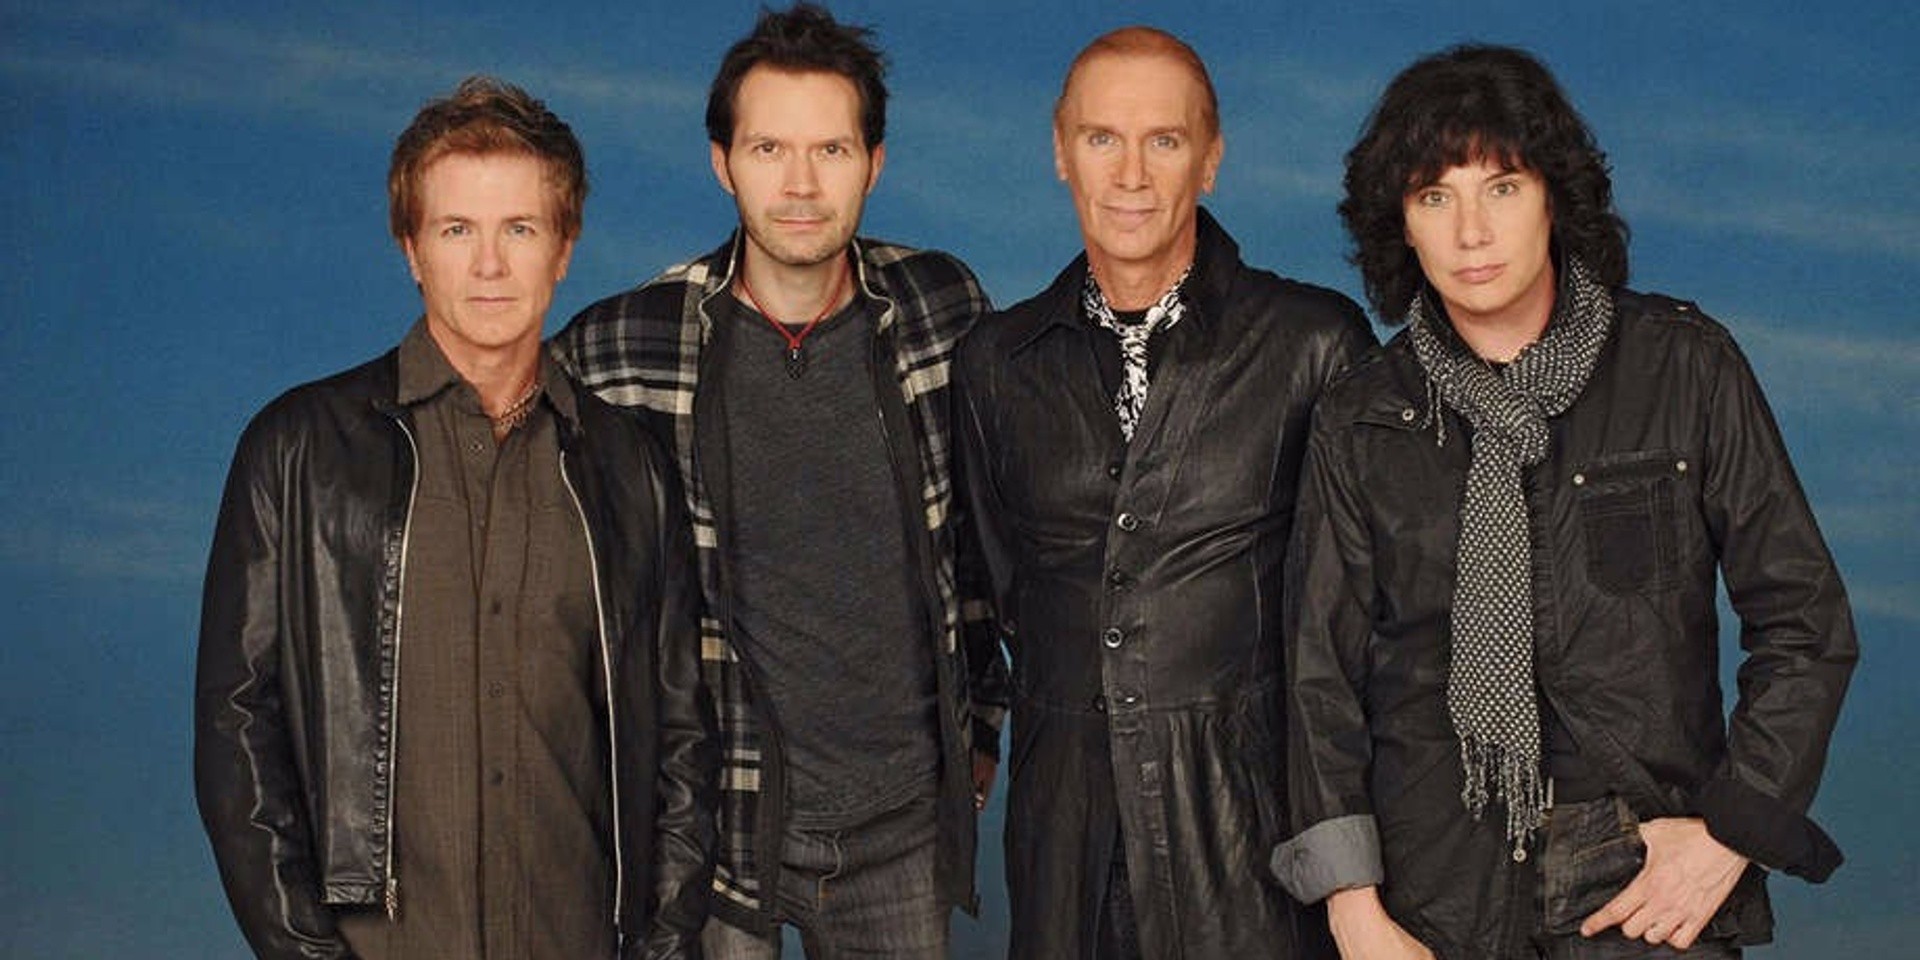 Here are the best songs off Mr. Big's discography